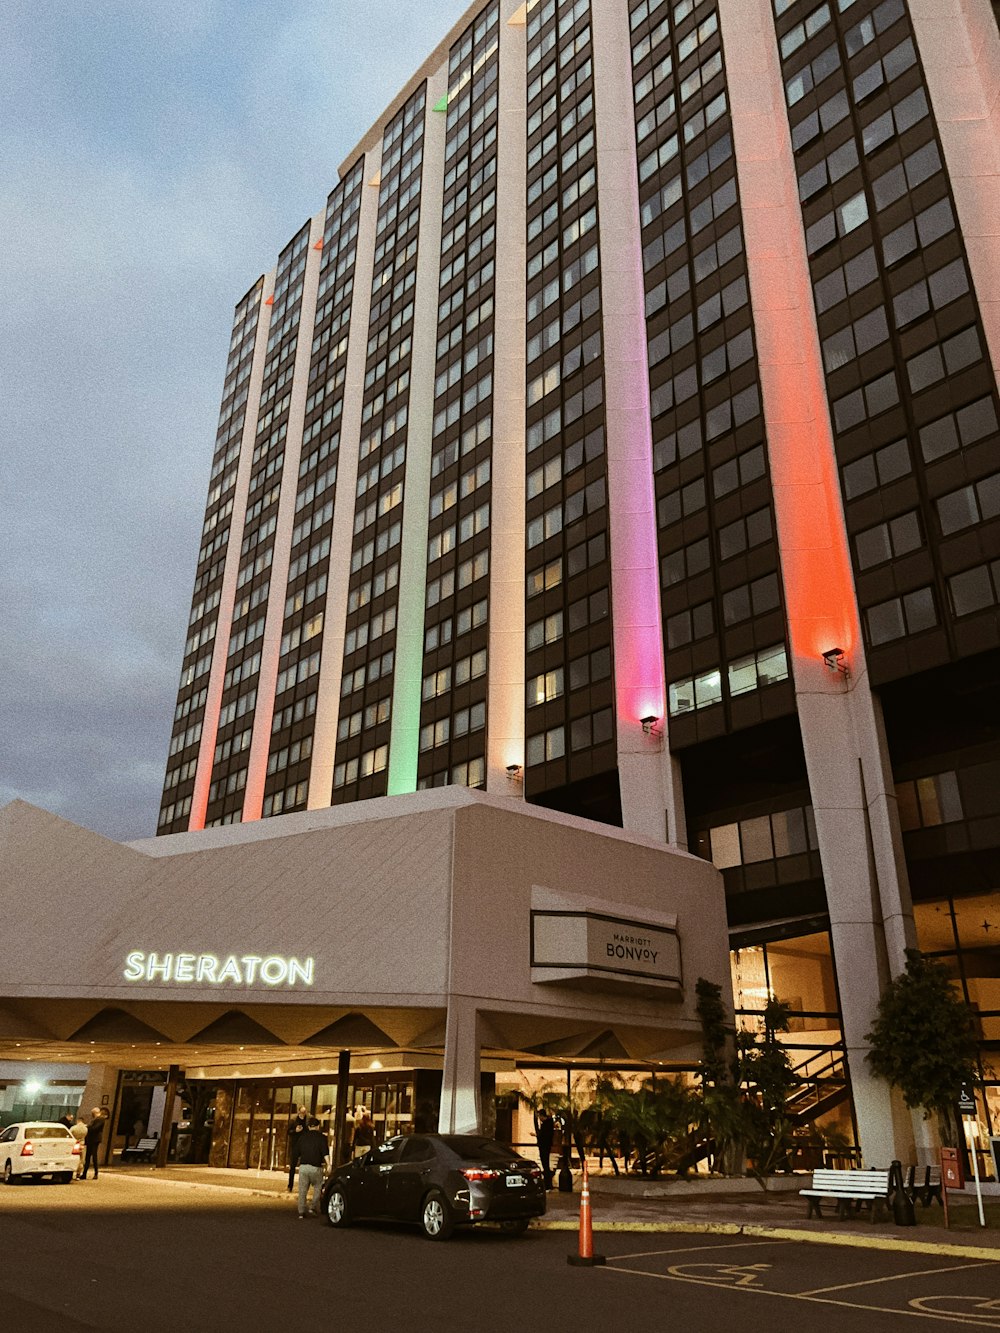 the sheraton hotel is lit up in rainbow colors